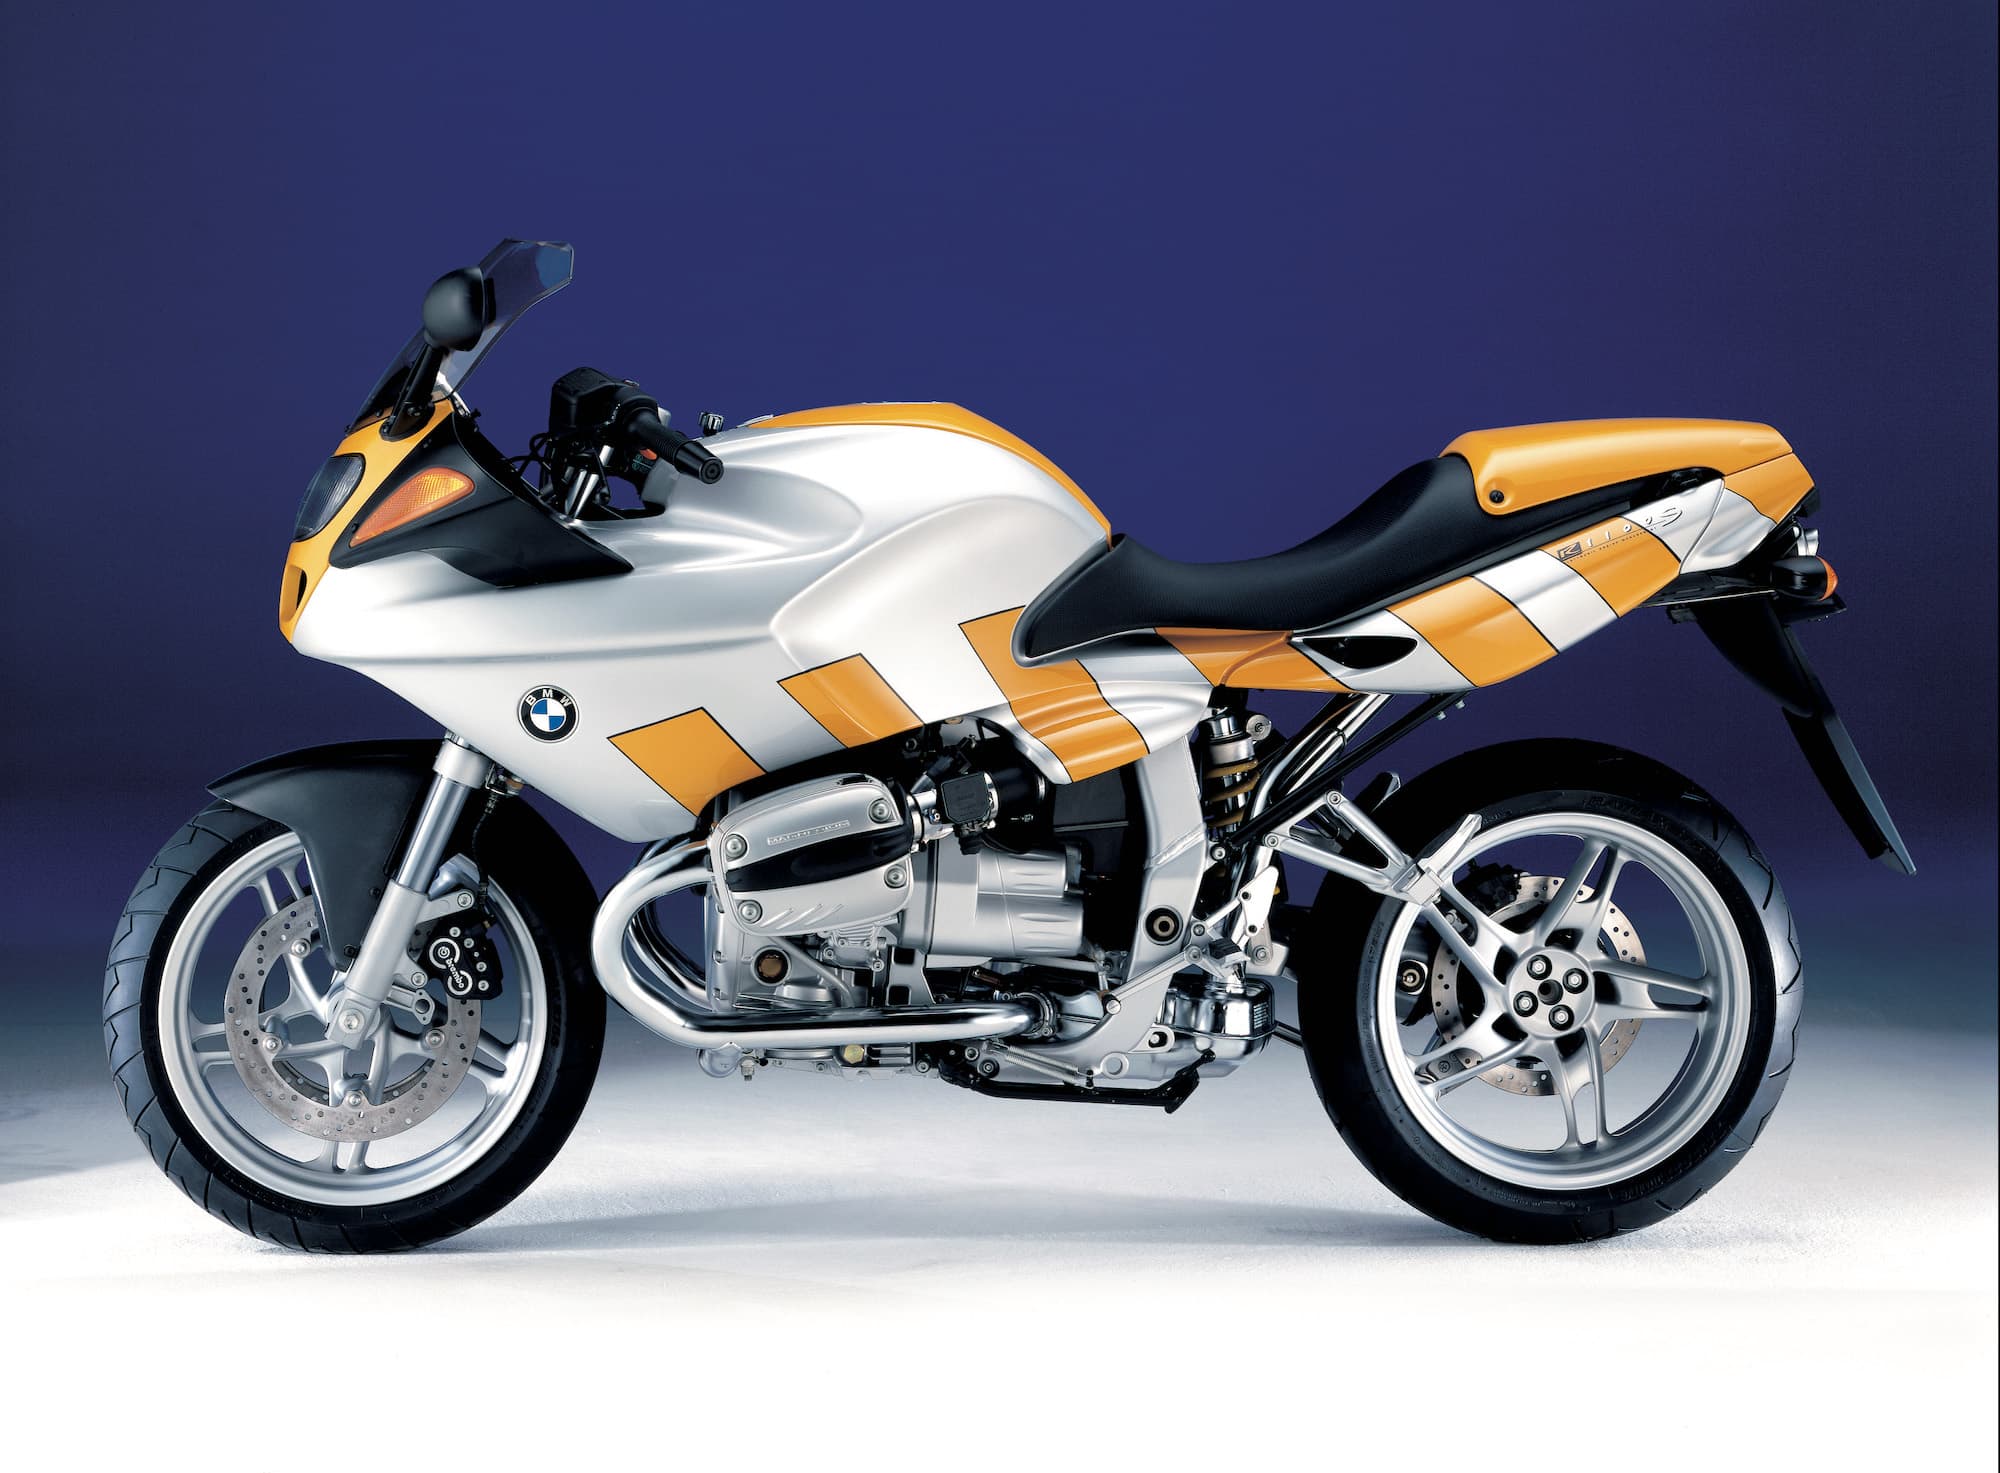 BMW R 1100 S silver and yellow